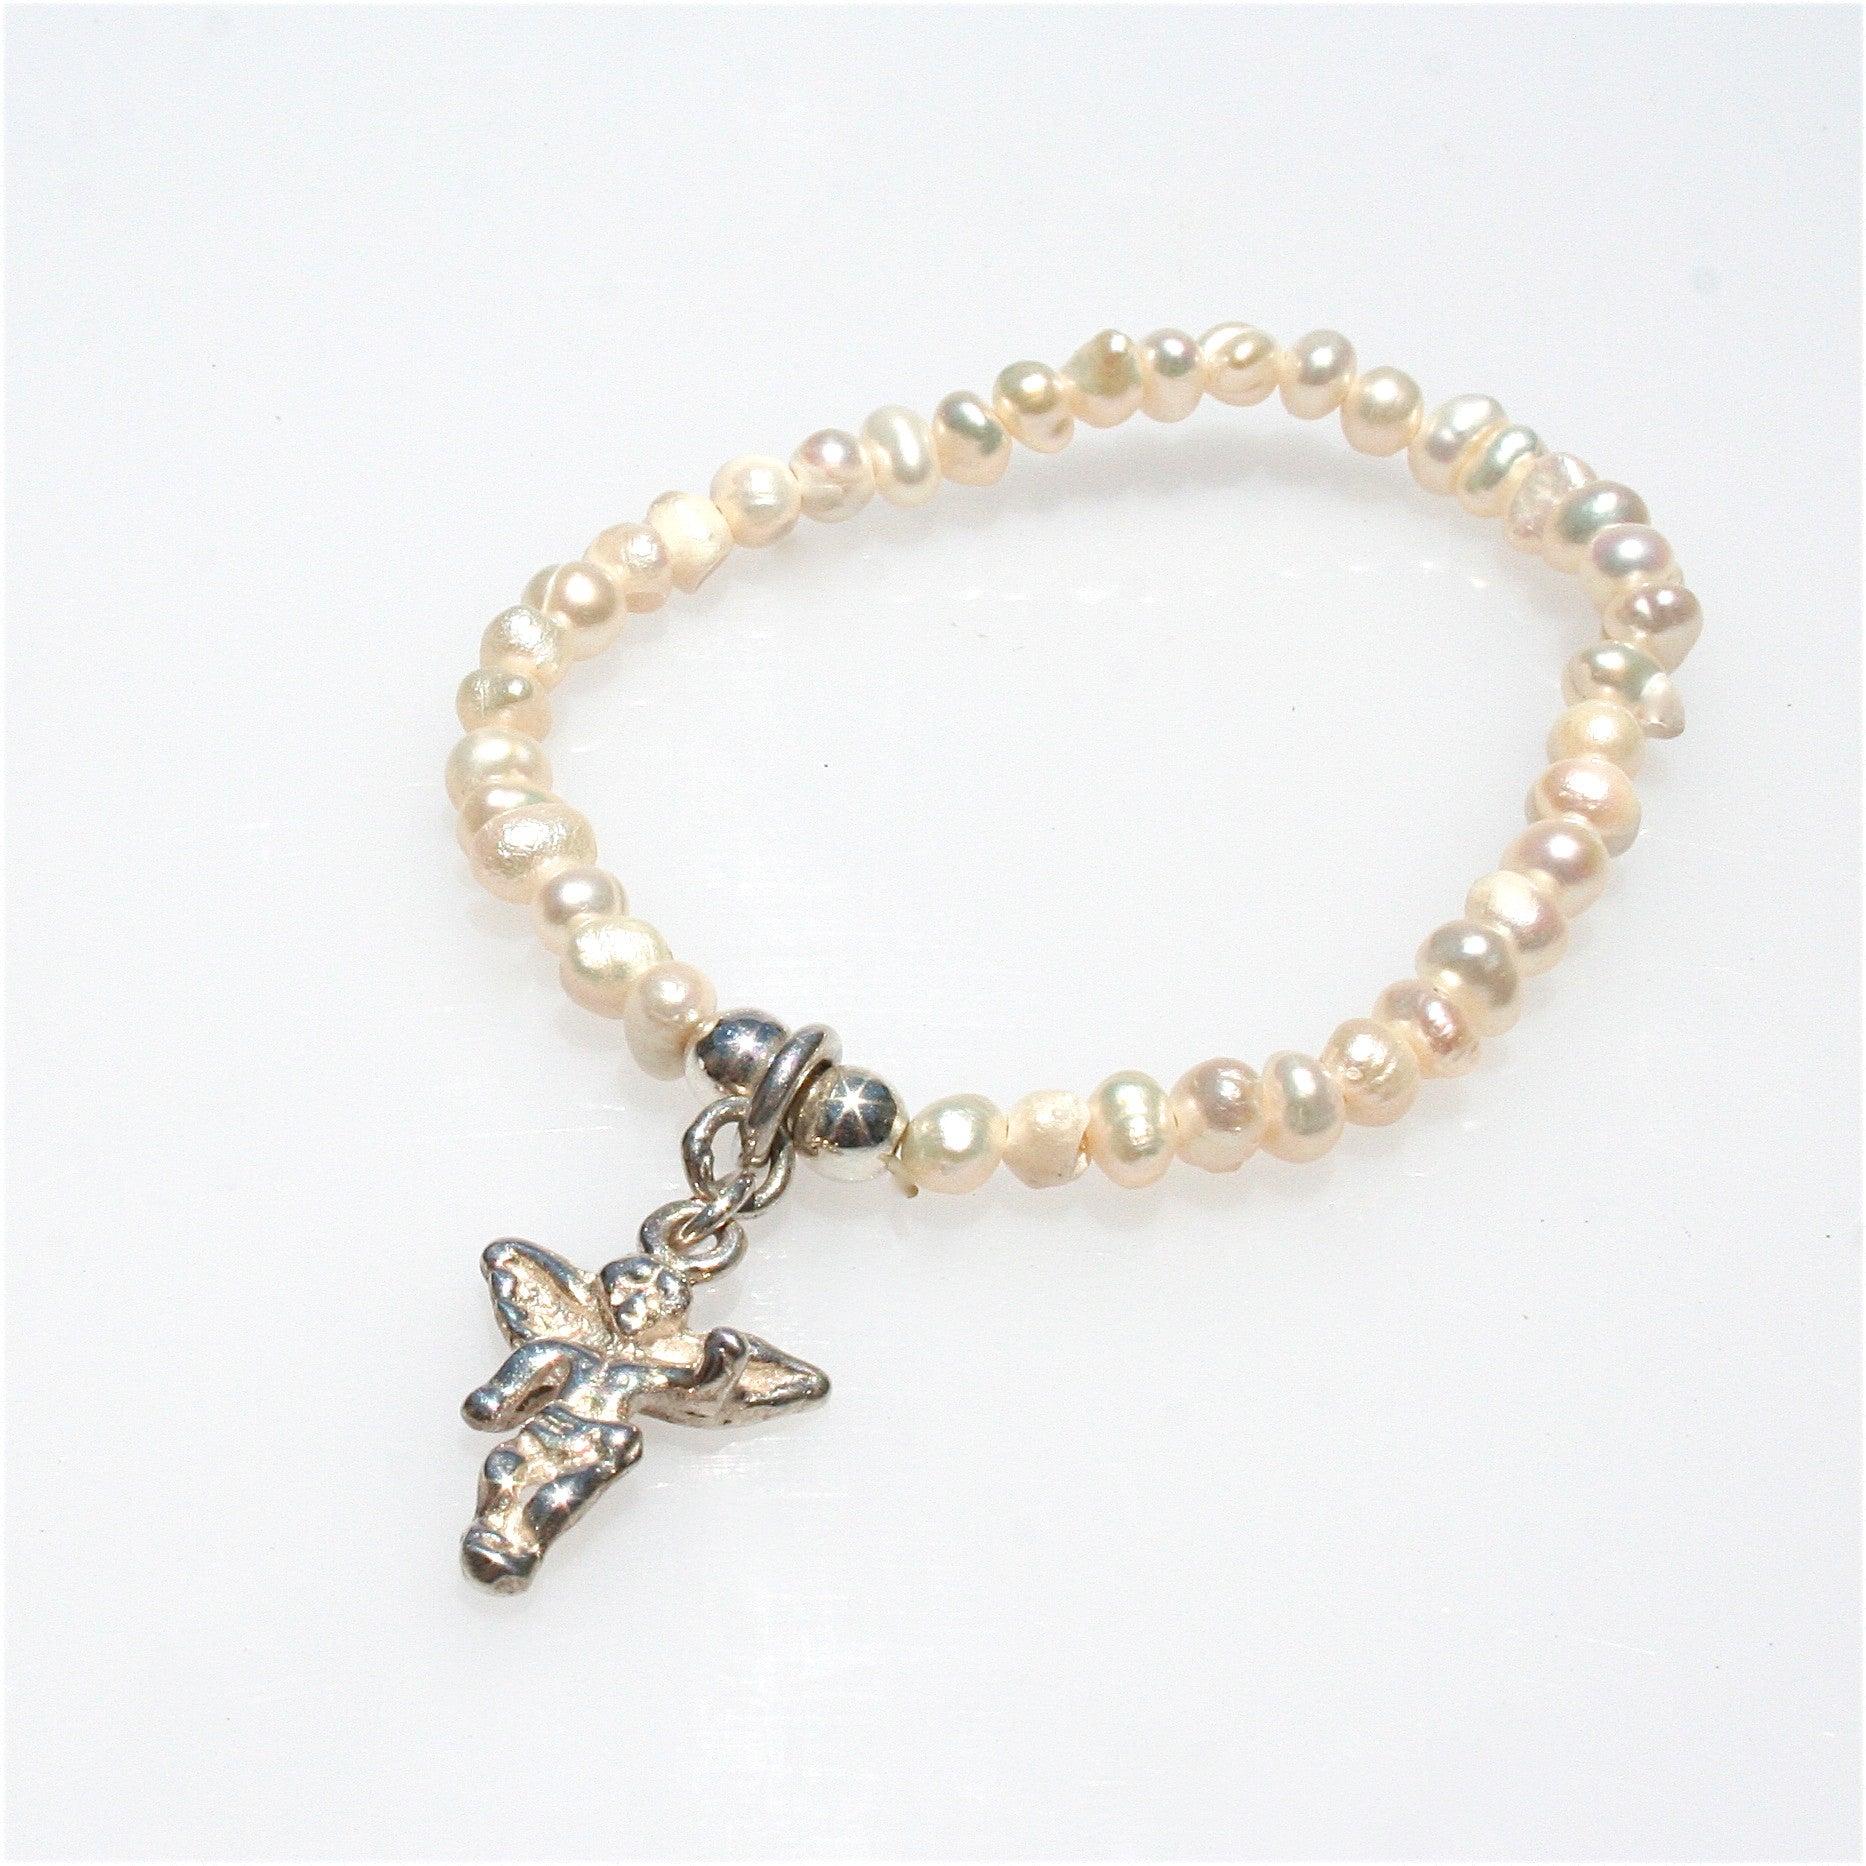 PEARL STRETCH BRACELET WITH STERLING SILVER GUARDIAN ANGEL CHARM